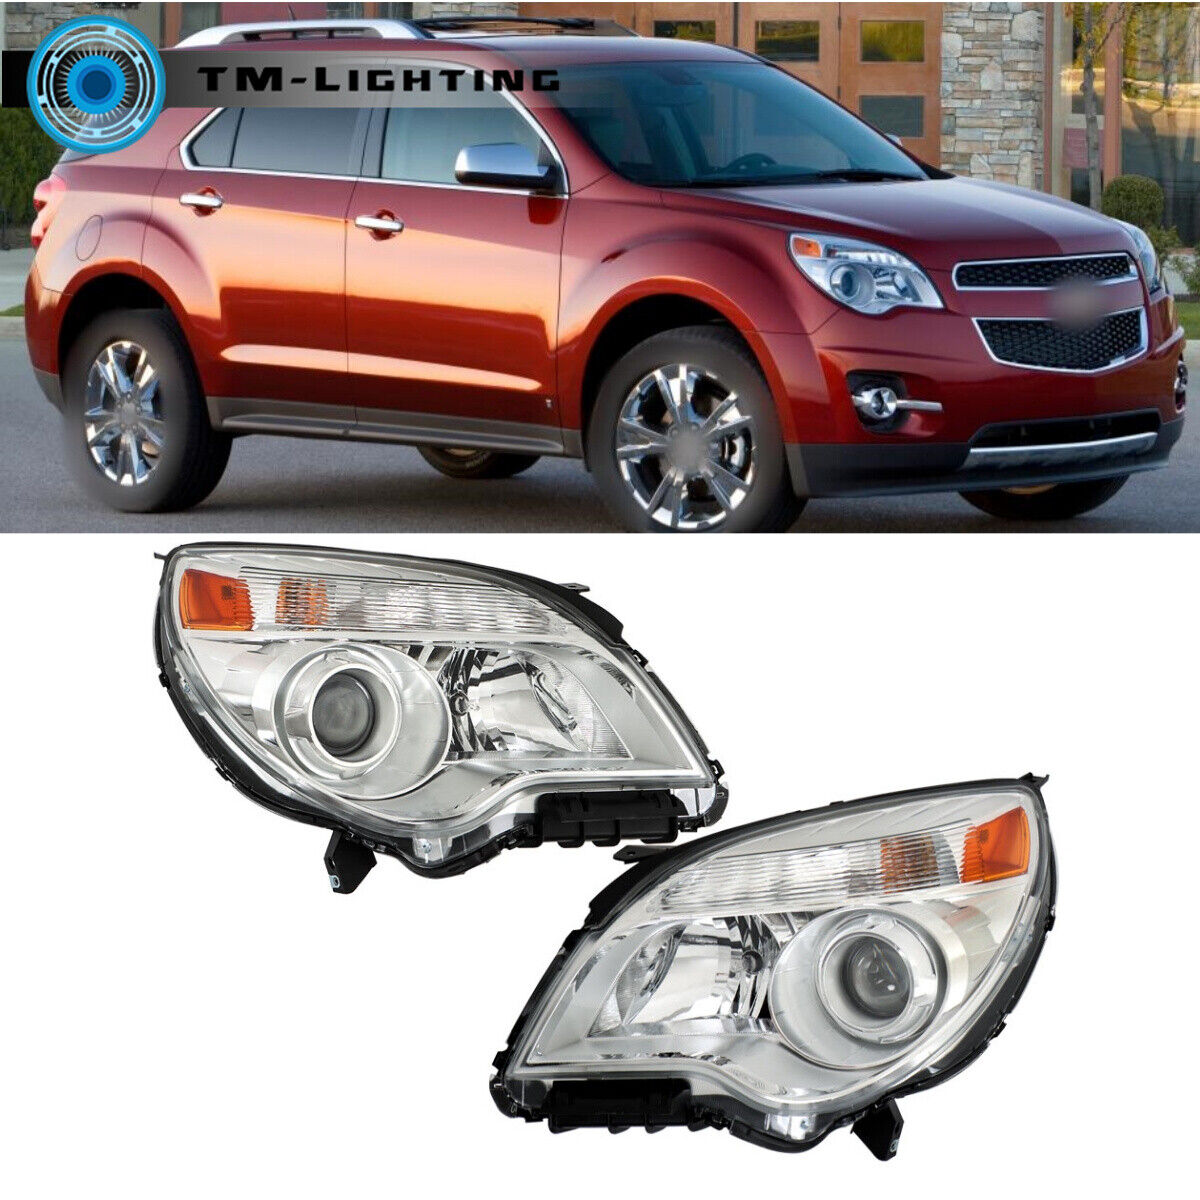 Left&Right Side Halogen Chrome For Chevy Equinox 2011-13 2014 2015 Headlights